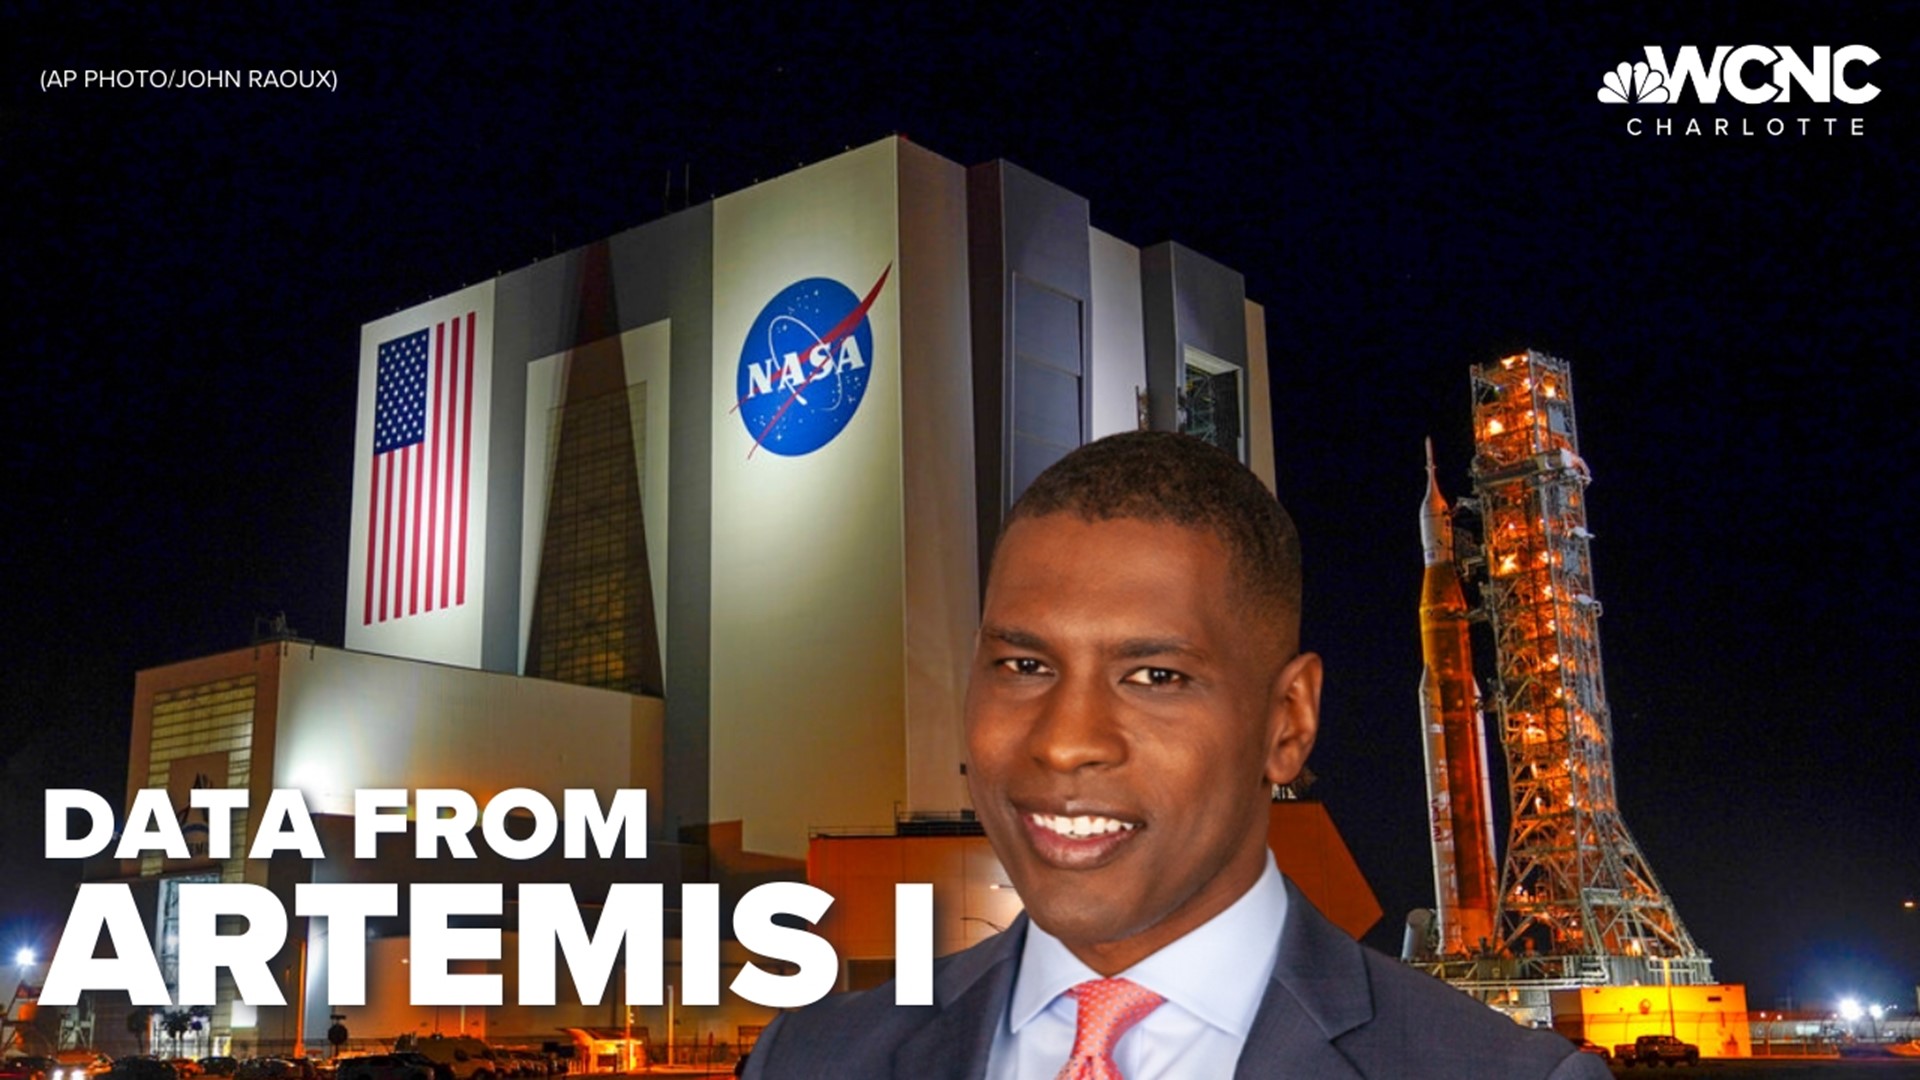 Meteorologist KJ Jacobs gives you an update on Artemis I and previews the Artemis II launch.